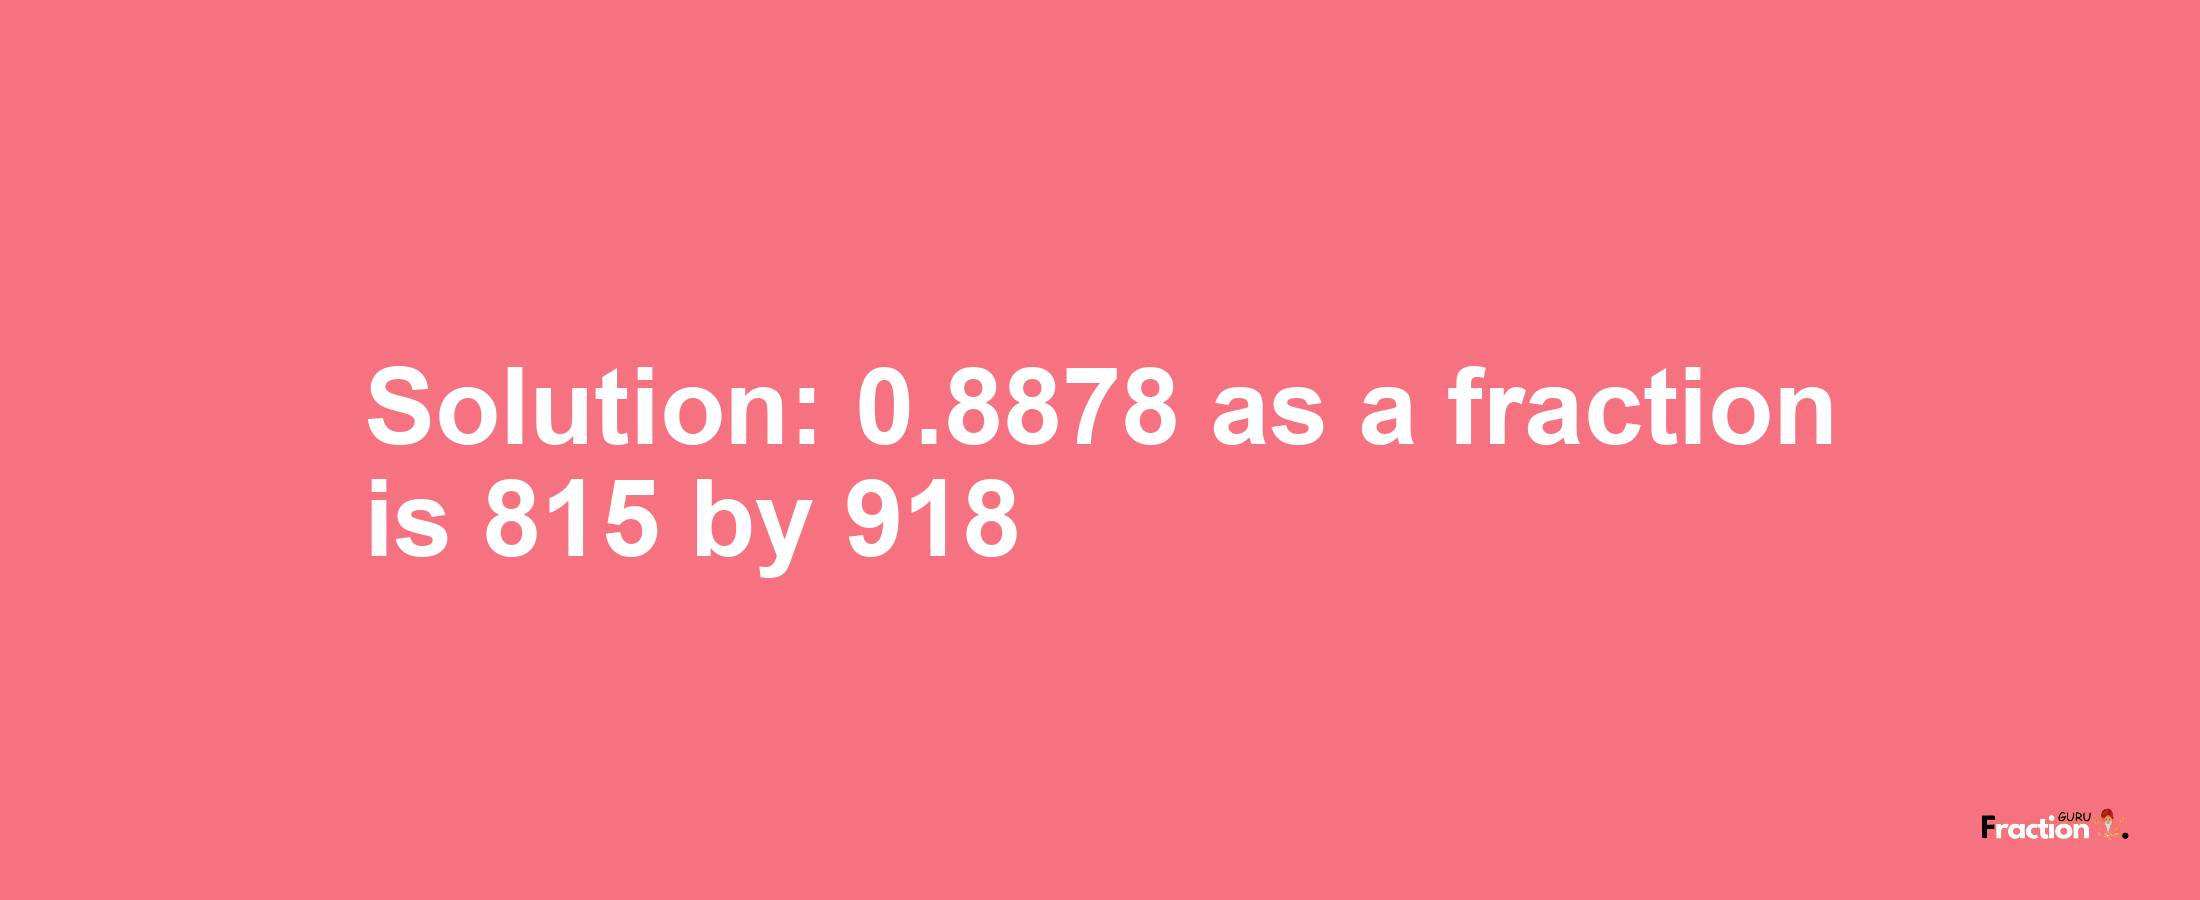 Solution:0.8878 as a fraction is 815/918